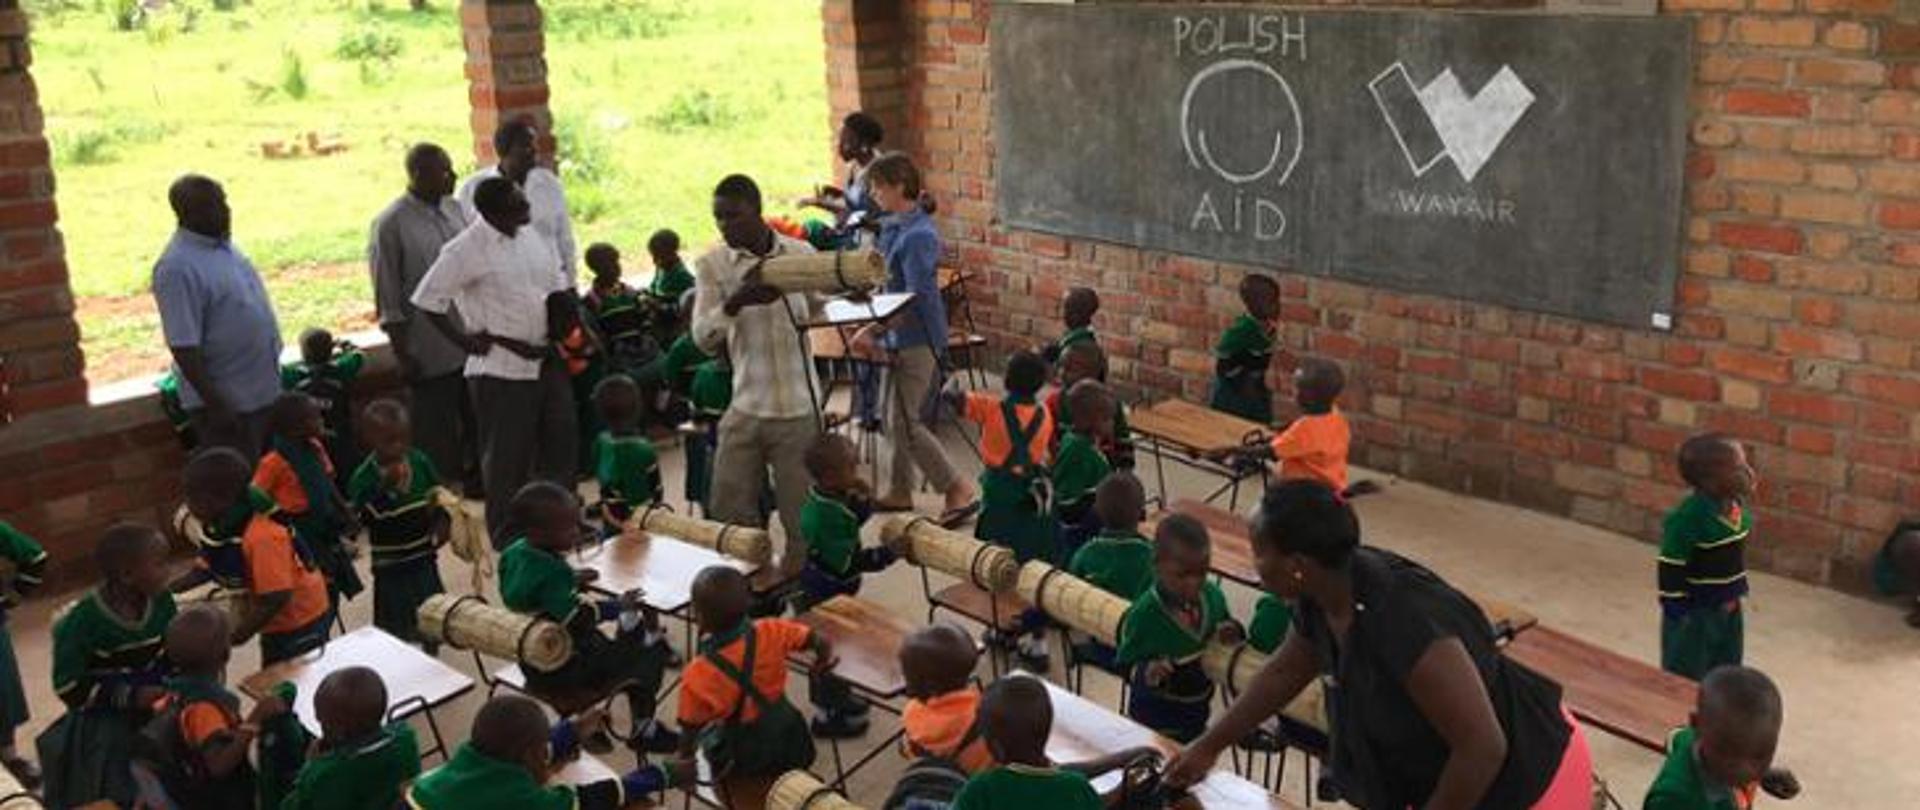 Polish Educational Mission - equalising educational opportunities for children at the Ulyankulu refugee camp by building an early and pre-school education centre and organising a series of workshops for children and teacher training in the Tabora region
